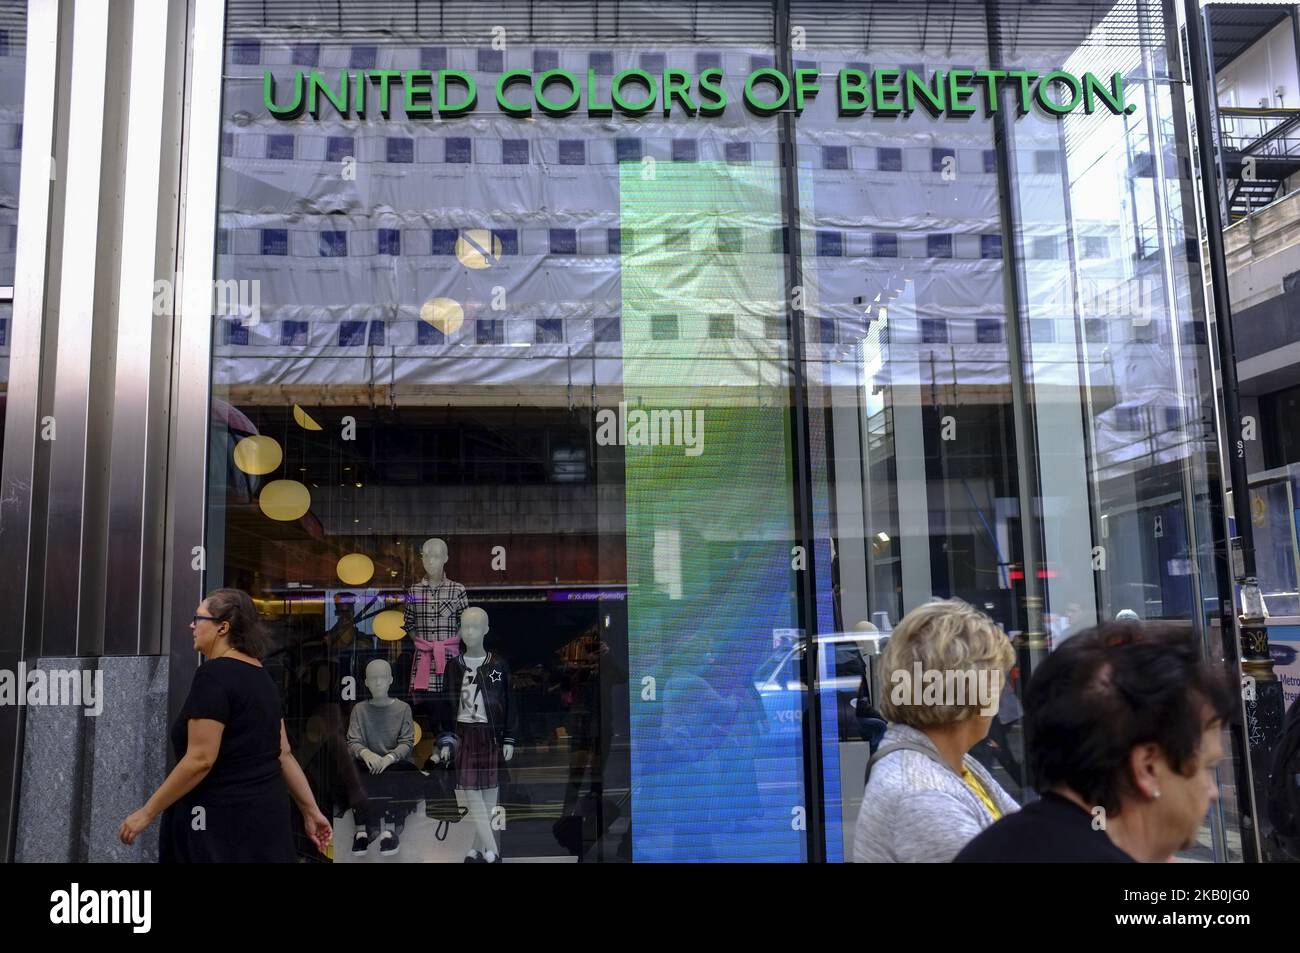 A United Colors Of Benetton store is pictured in central London on August 29, 2018. Following the collapse of Morandi Bridge in Genoa, which costed the life to 41 people, Italy's Deputy Prime Minister Matteo Salvini signaled support for a political compromise taking shape following last week's Genoa bridge collapse, saying he favored a government ownership role in toll-road operator Autostrade per l'Italia, but opposed nationalizing the highway network. Autostrade is a motorways concession society, part of the Atlantia Group, which owns 88.06% of the share capital and refers, as the main shar Stock Photo